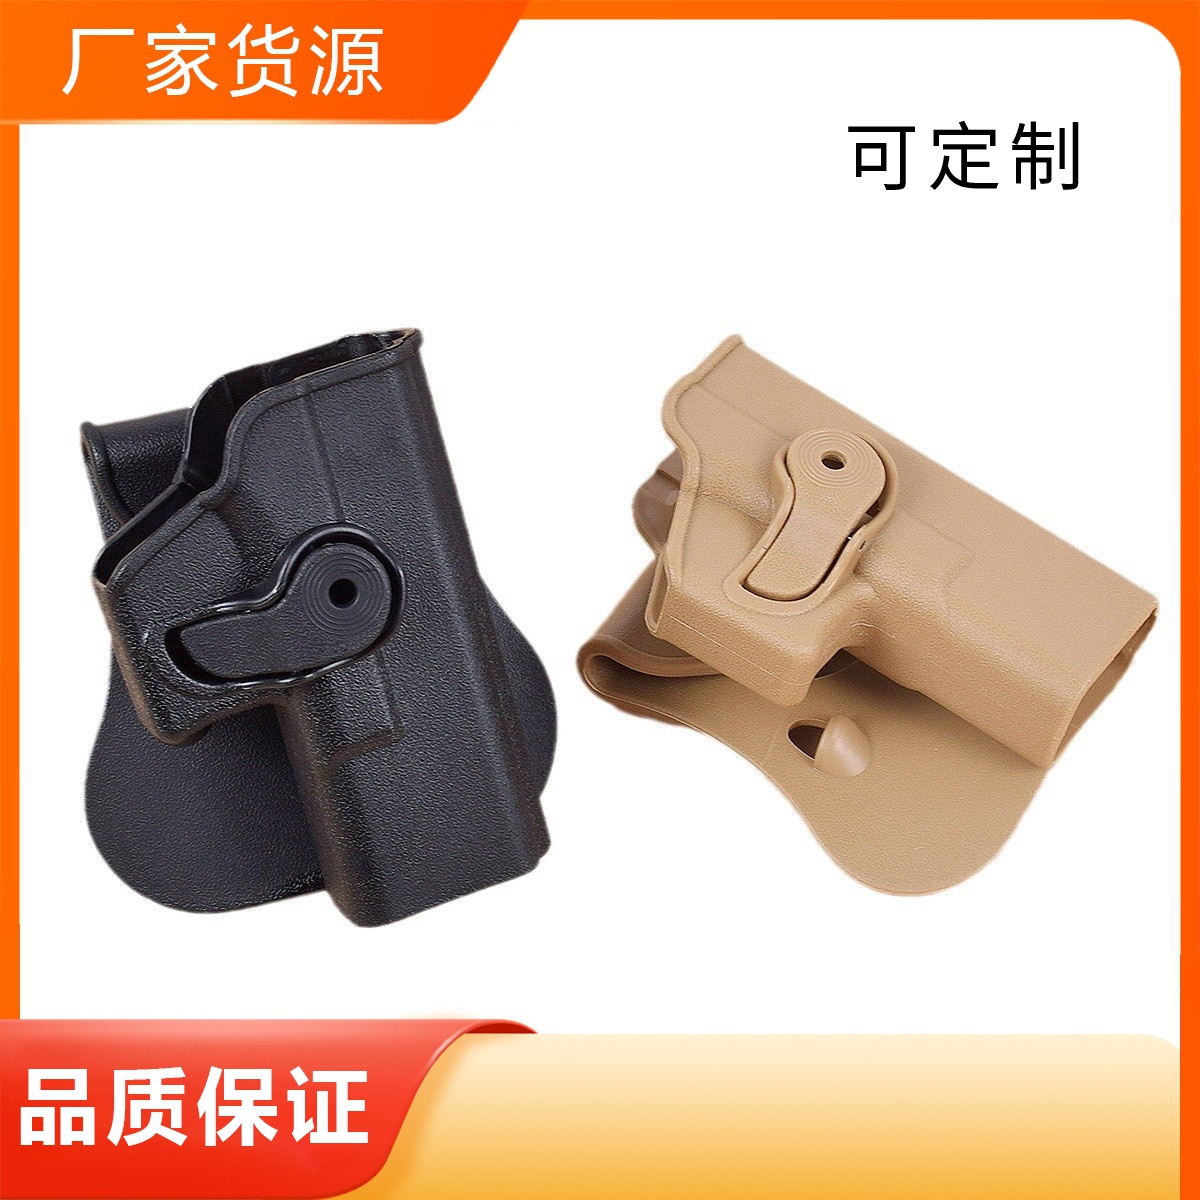 Quality assurance for best-selling products Outdoor M92/G17/1911 quick pull tactical waist holster with adjustable rotating holster set CS tactical equipment